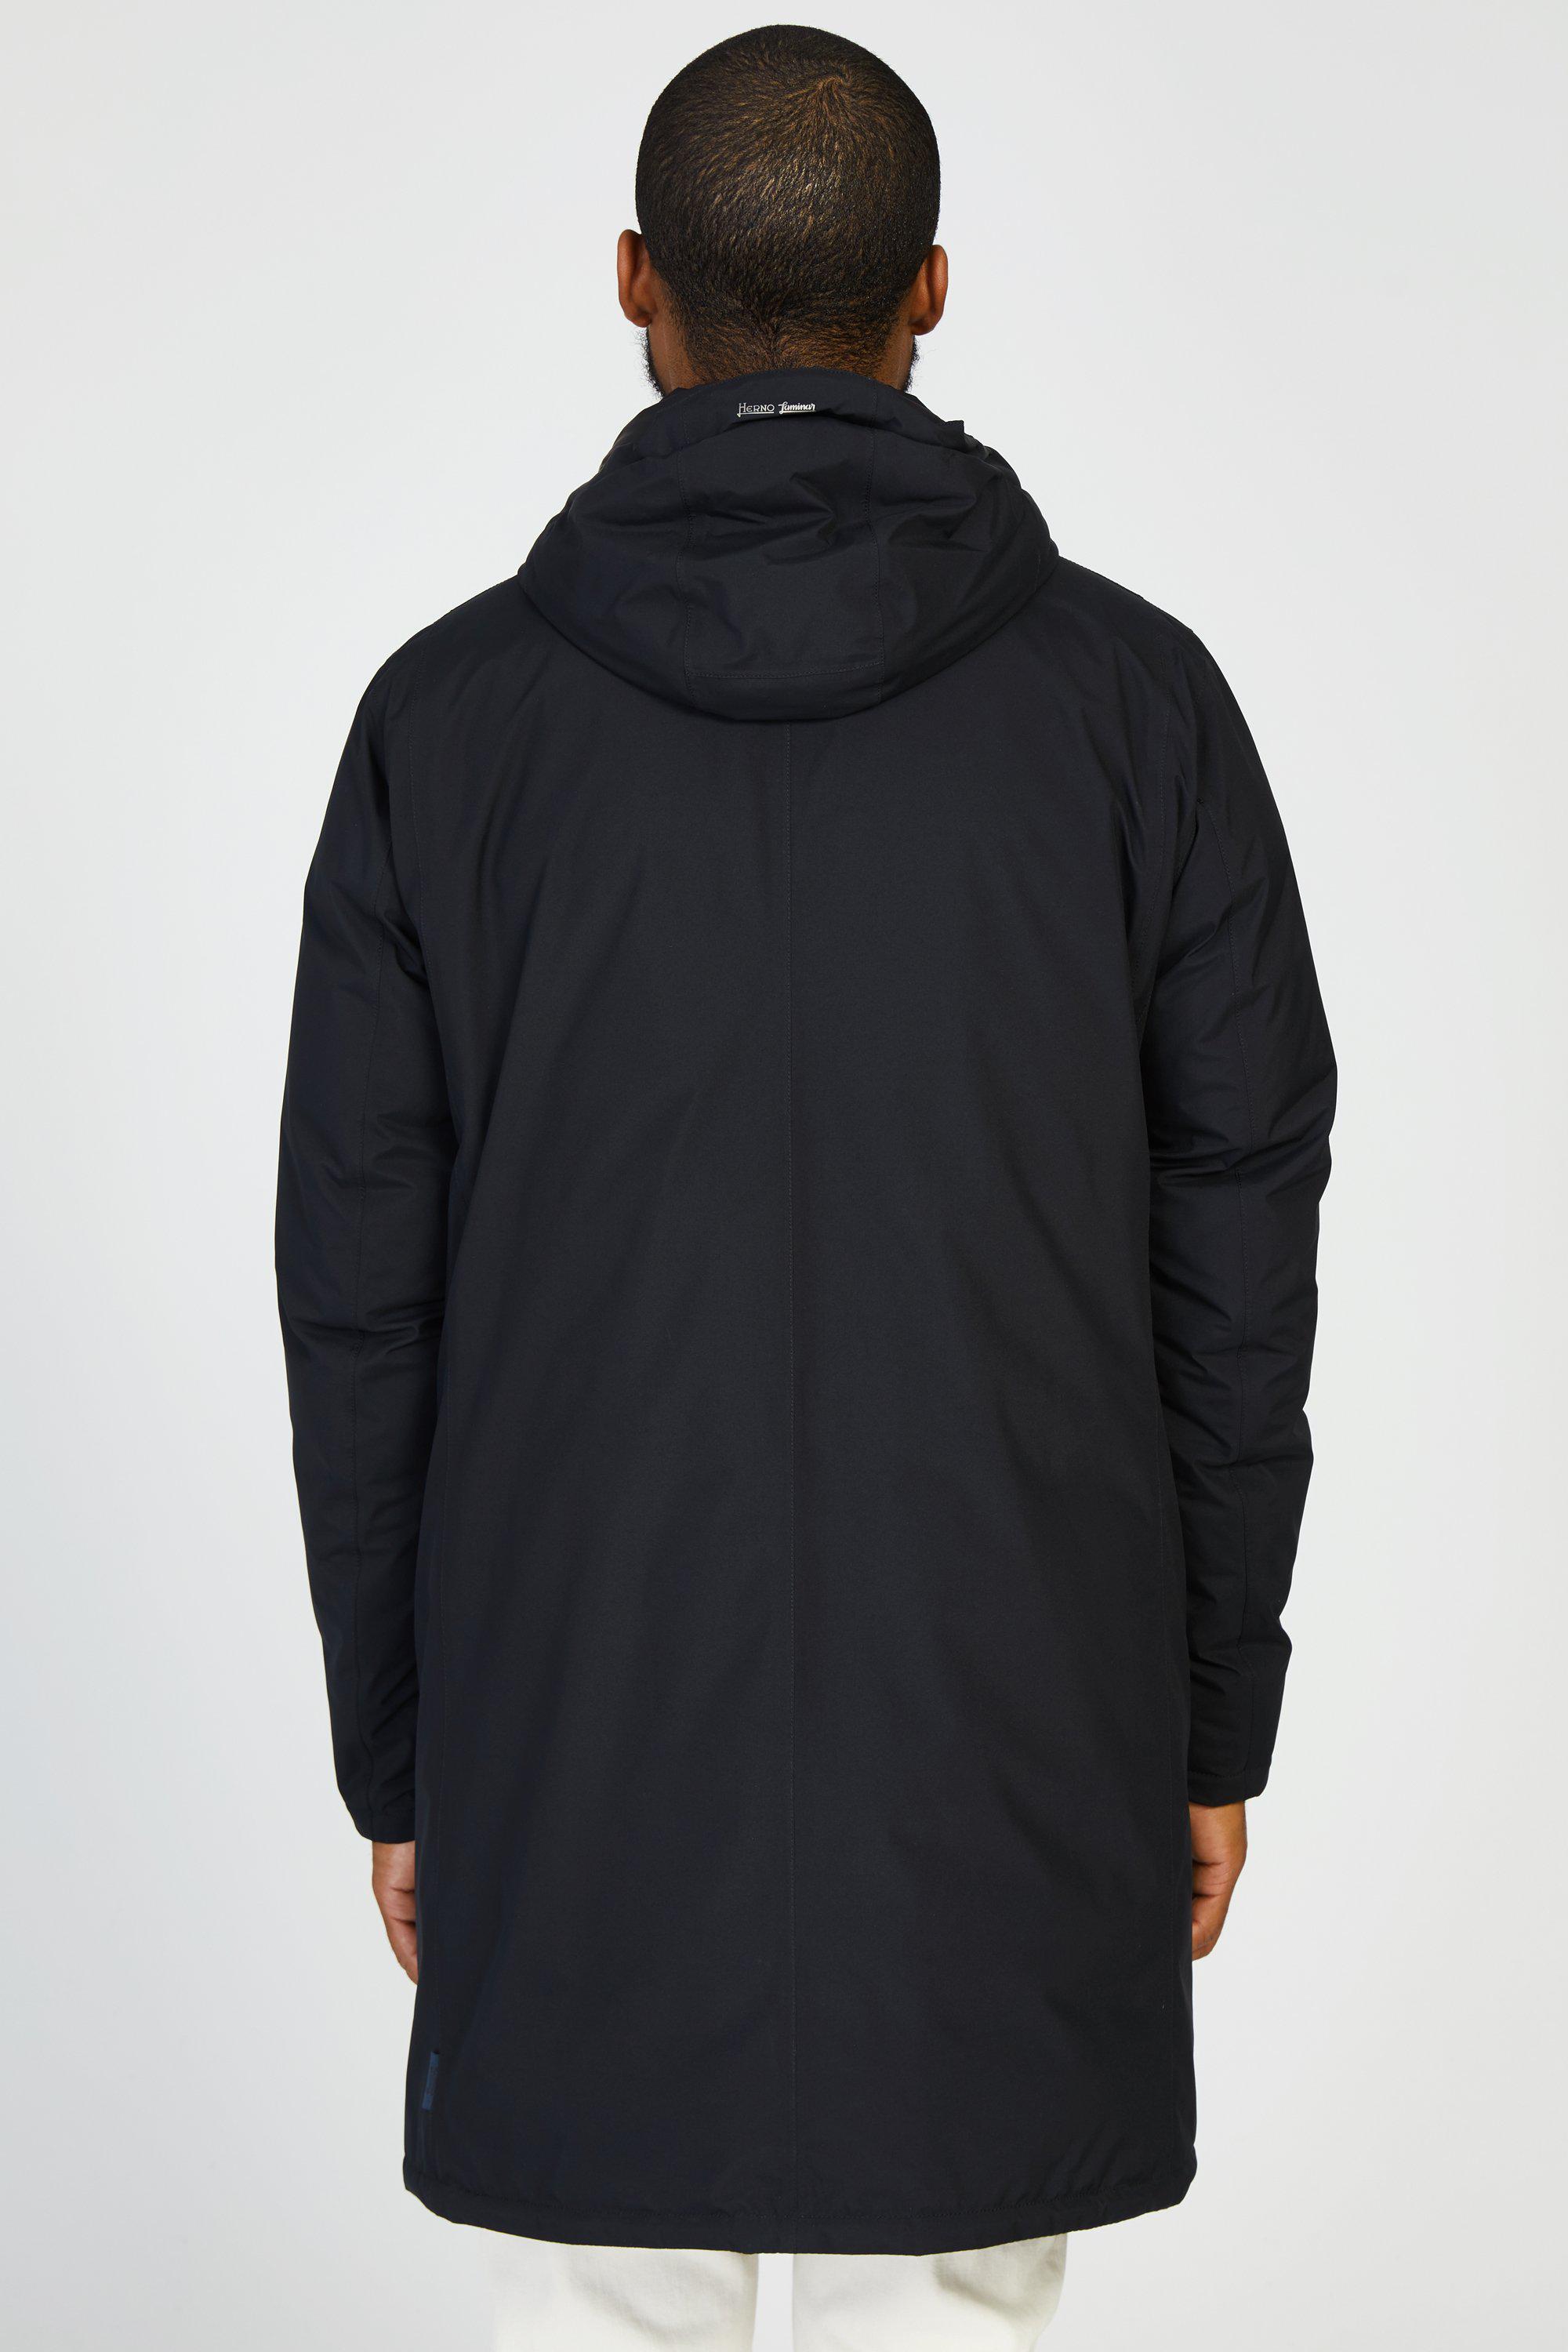 Herno Laminar Goretex Down Parka With Removable Hood in Black for 